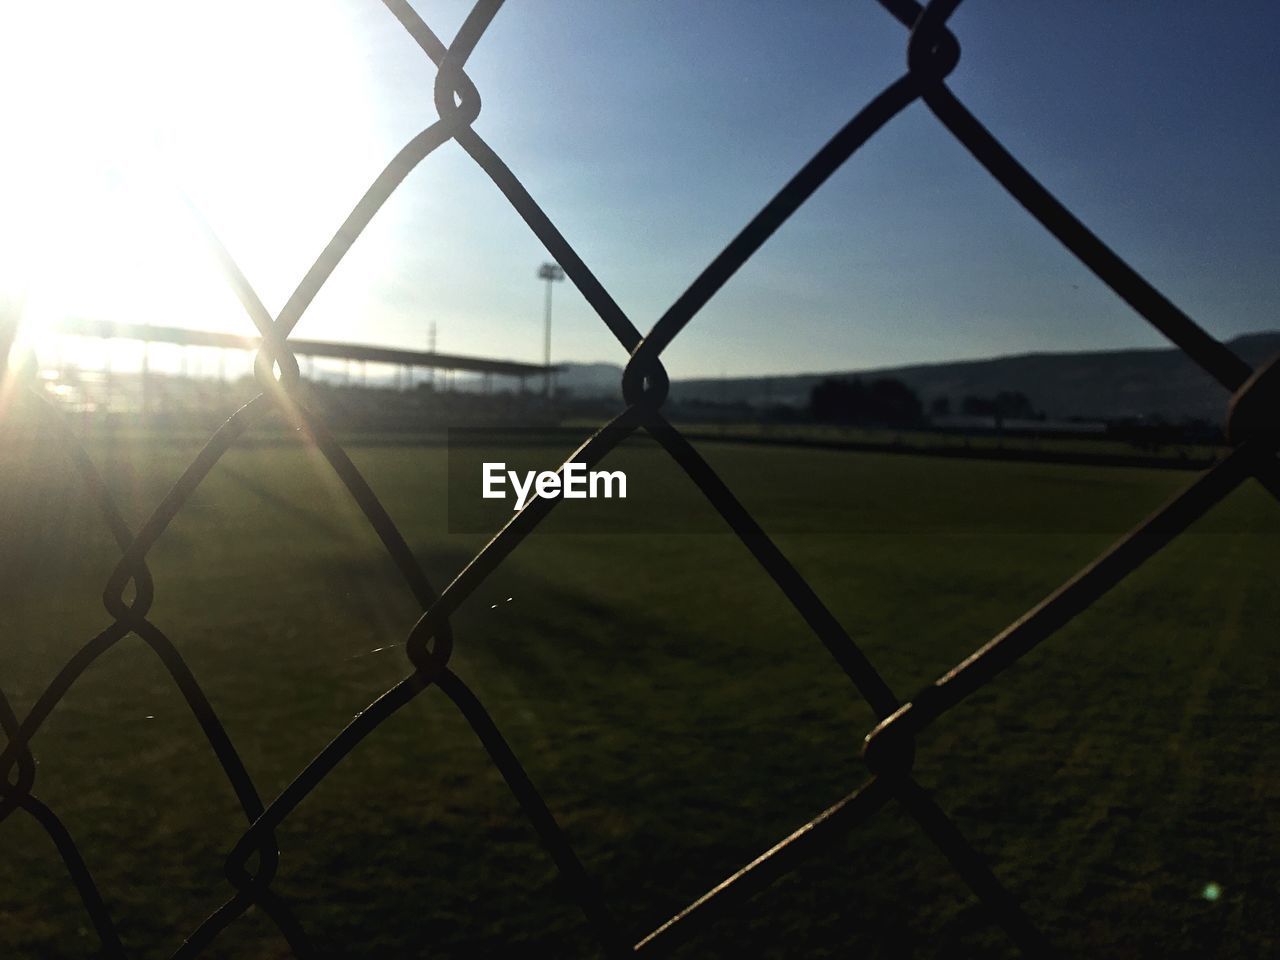 Scenic view of grassy landscape seen through chainlink fence